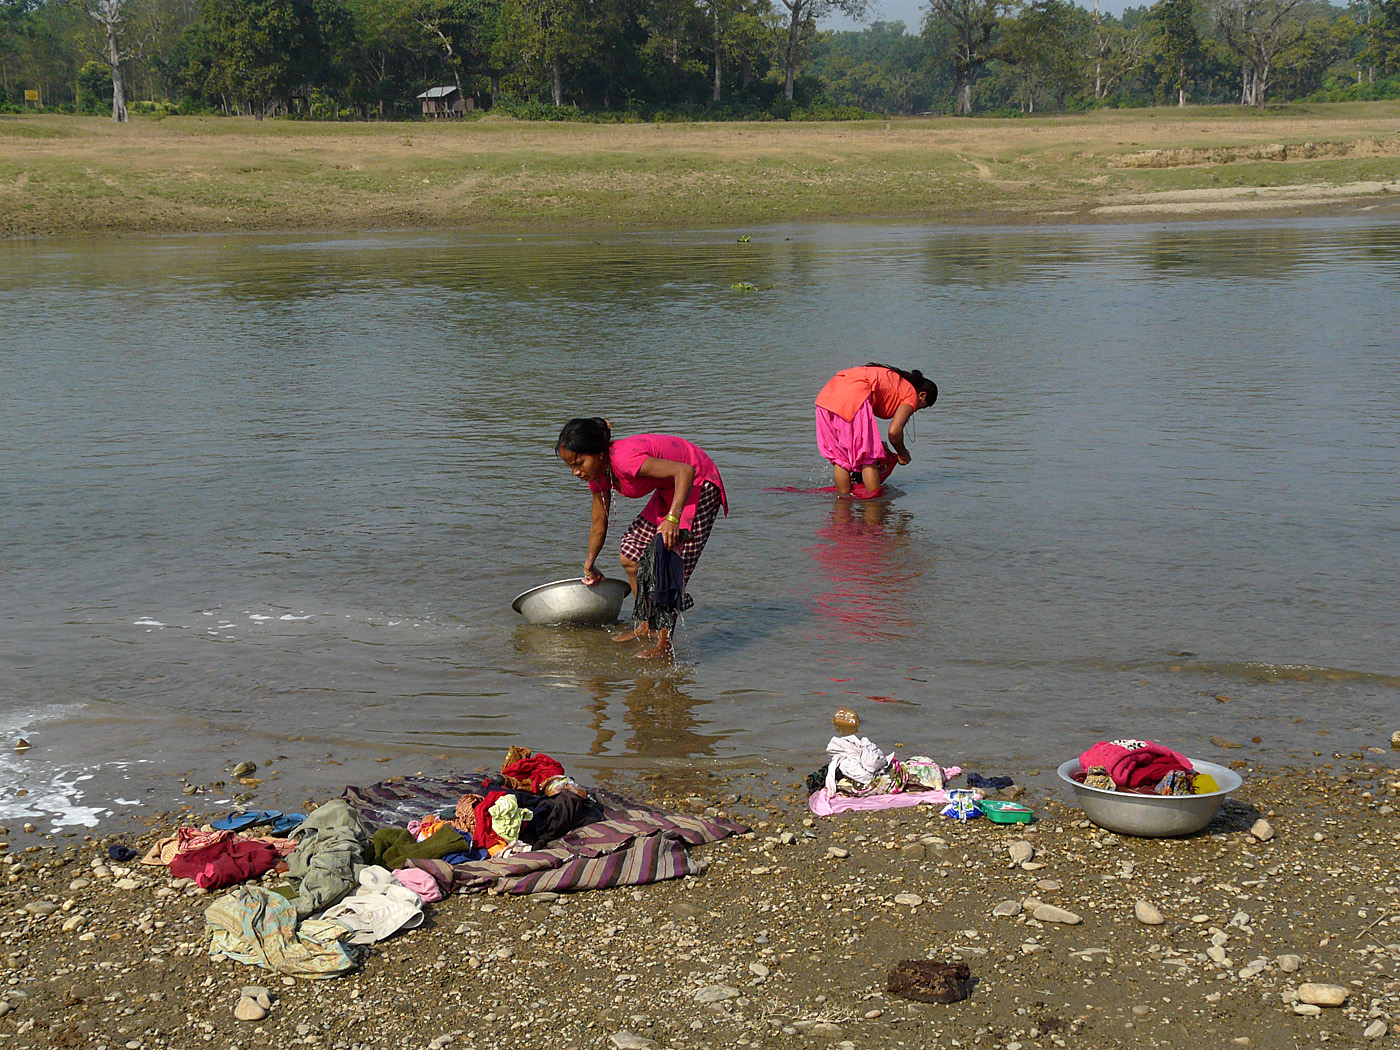 Washing clothes in Bhude Rapti River, Chitwan National Park